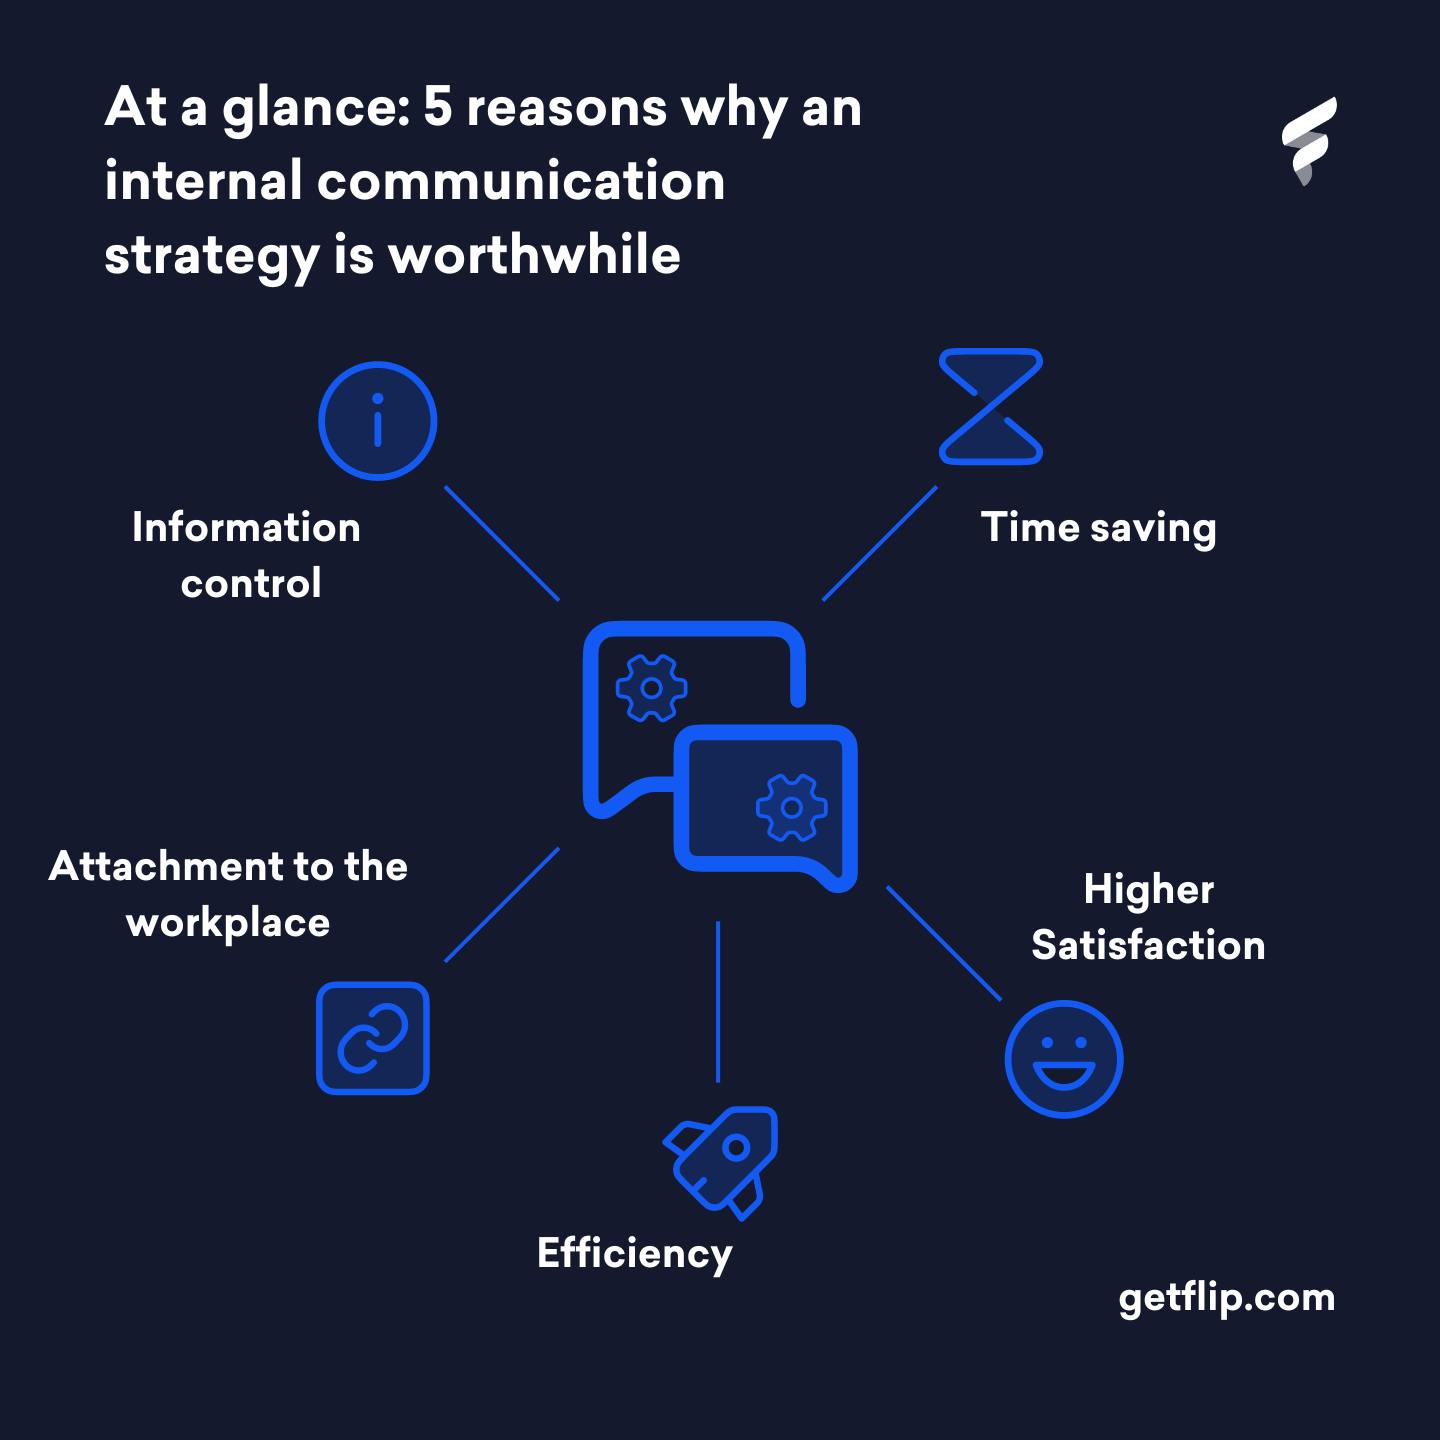 Infographic showing 5 reasons why an internal communication strategy is worthwhile